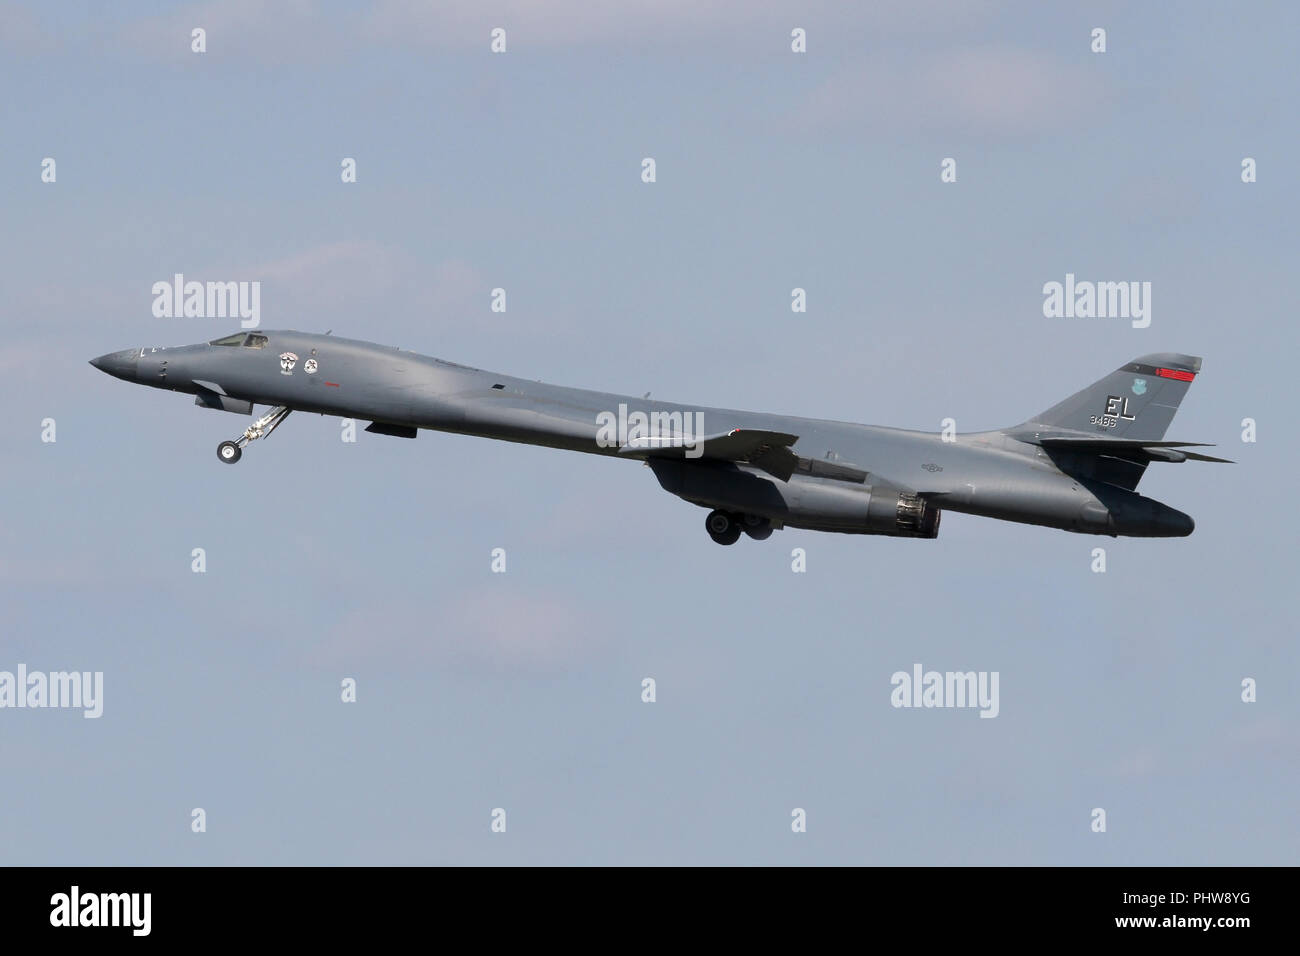 Rockwell B-1B Lancer from the 34th Bomb Squadron at Ellsworth AFB, South Dakota climbing out of RAF Mildenhall, Suffolk after a brief fuel stop. Stock Photo